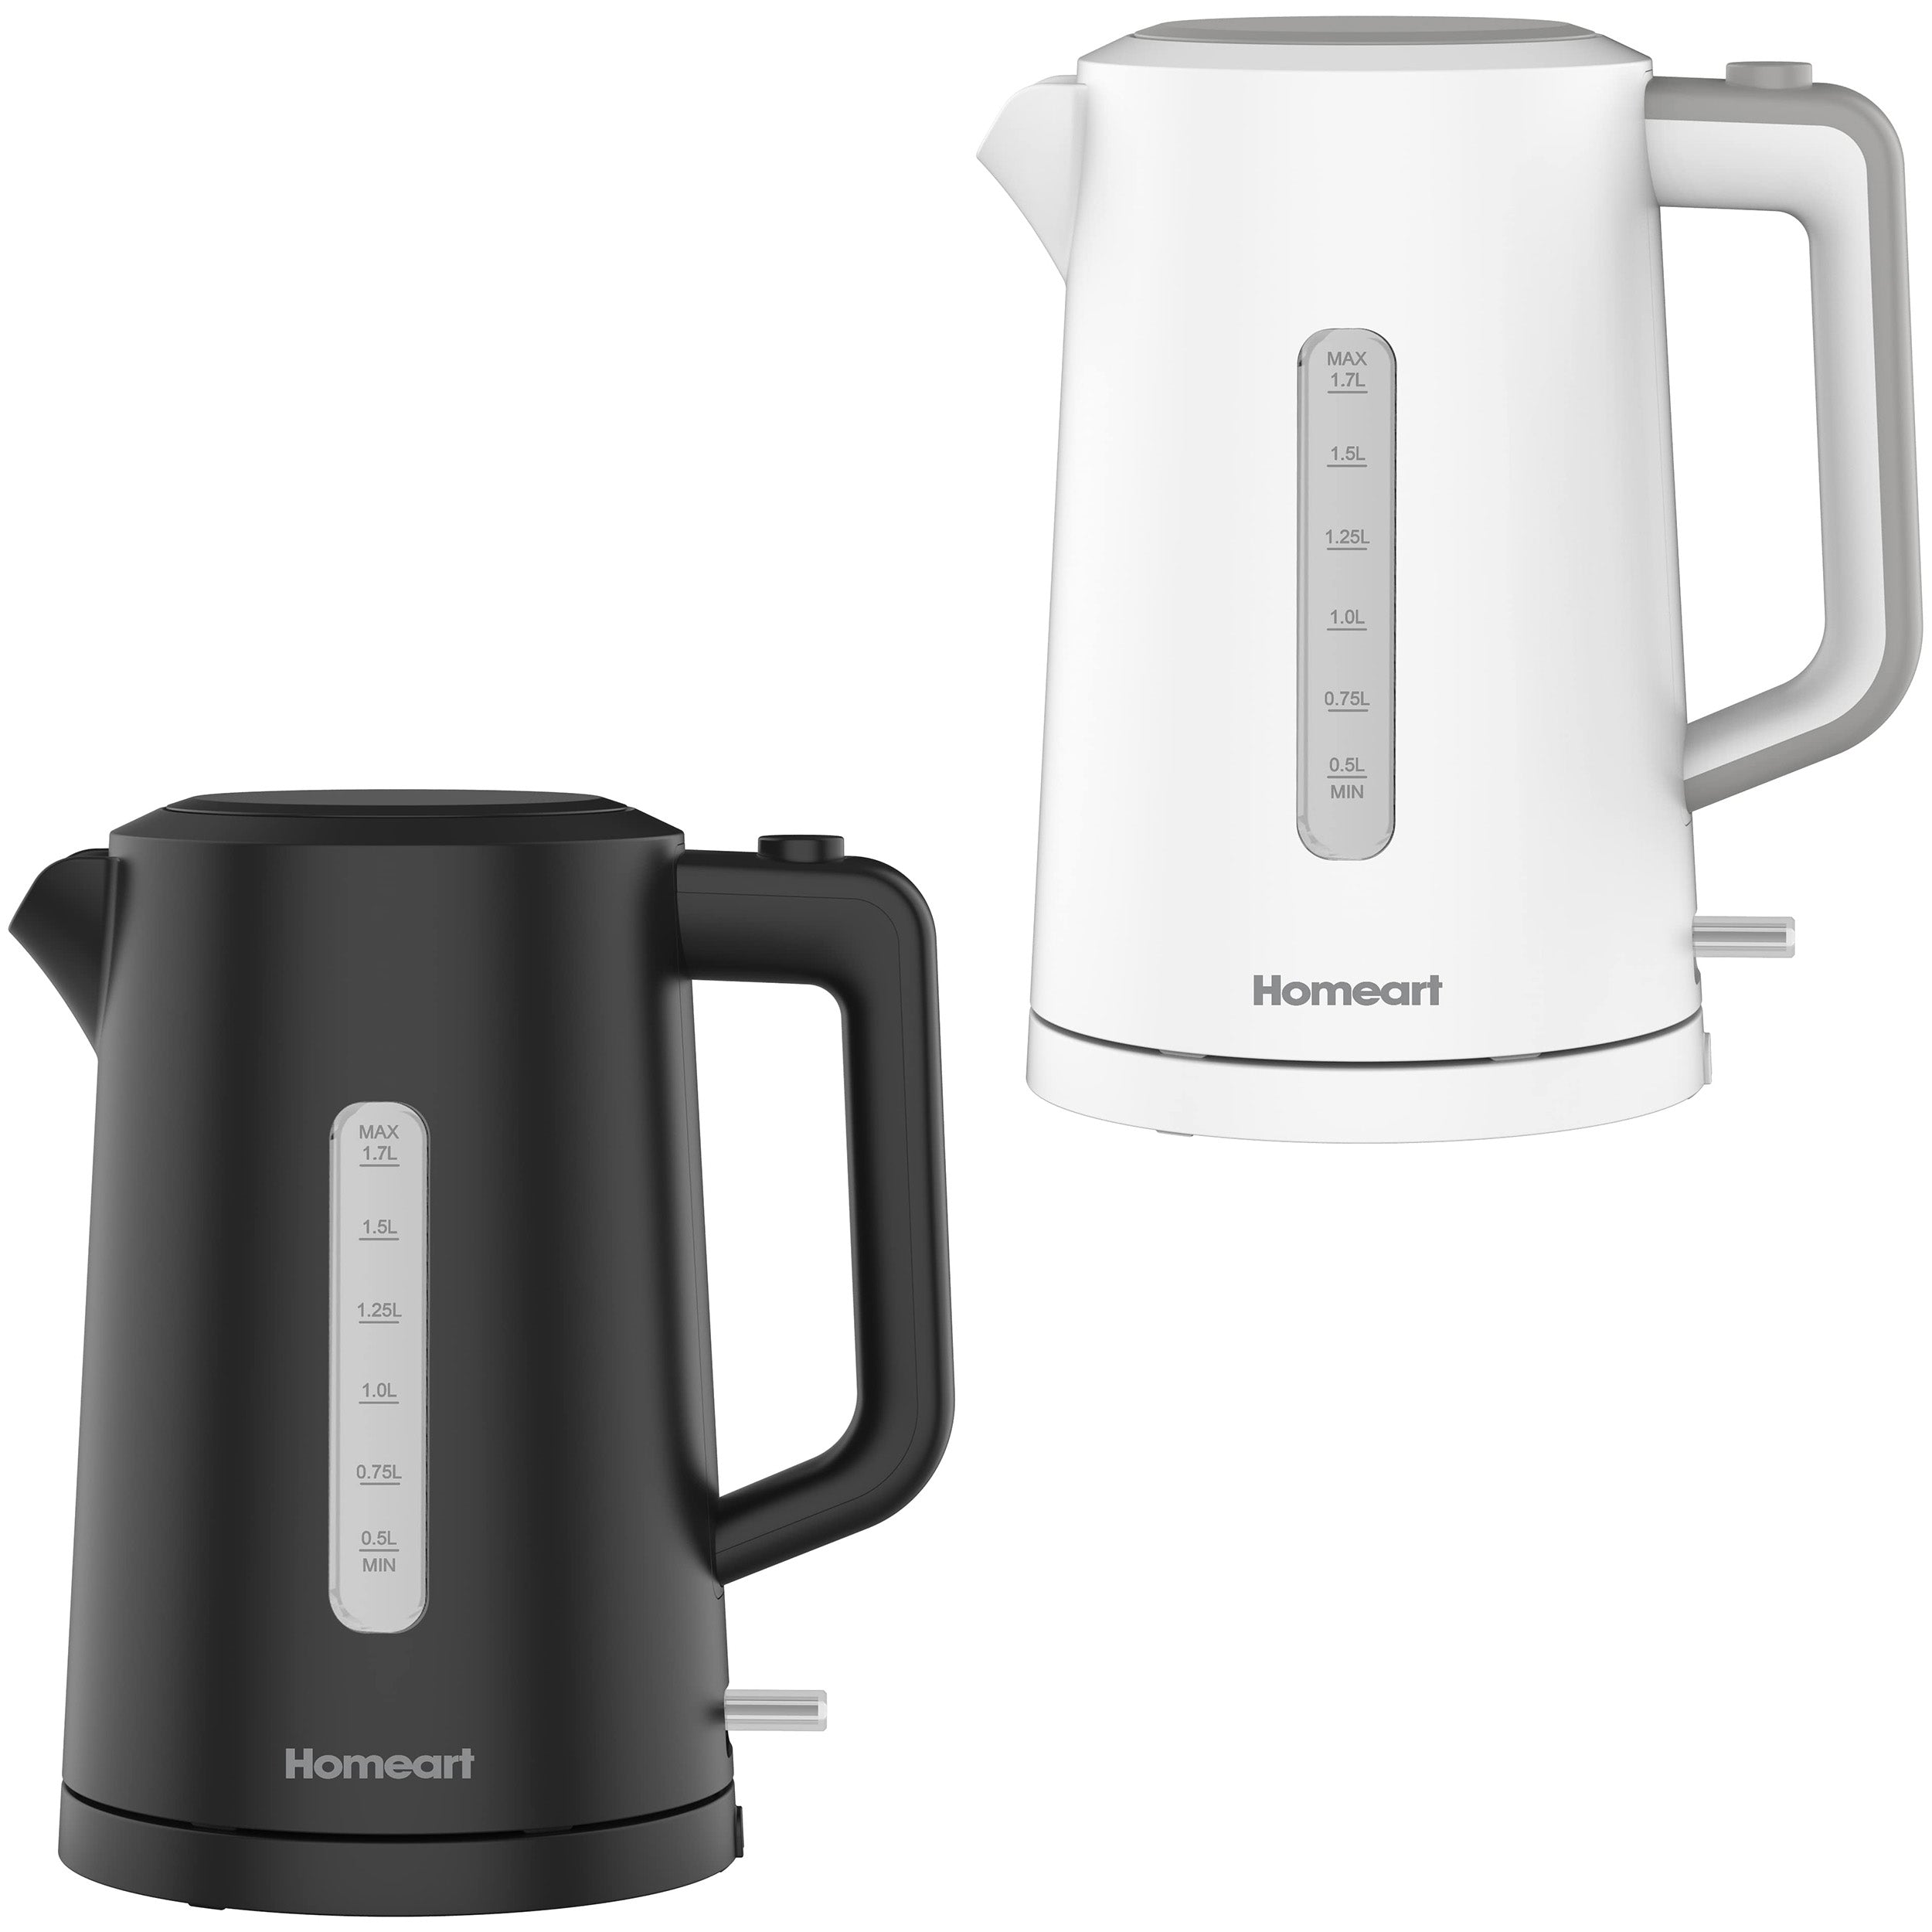 Homeart Staple Cordless Electric Kettle - Stainless Steel With Removable Filter, Fast Boiling and Auto Shut-off - 1.7L Capacity